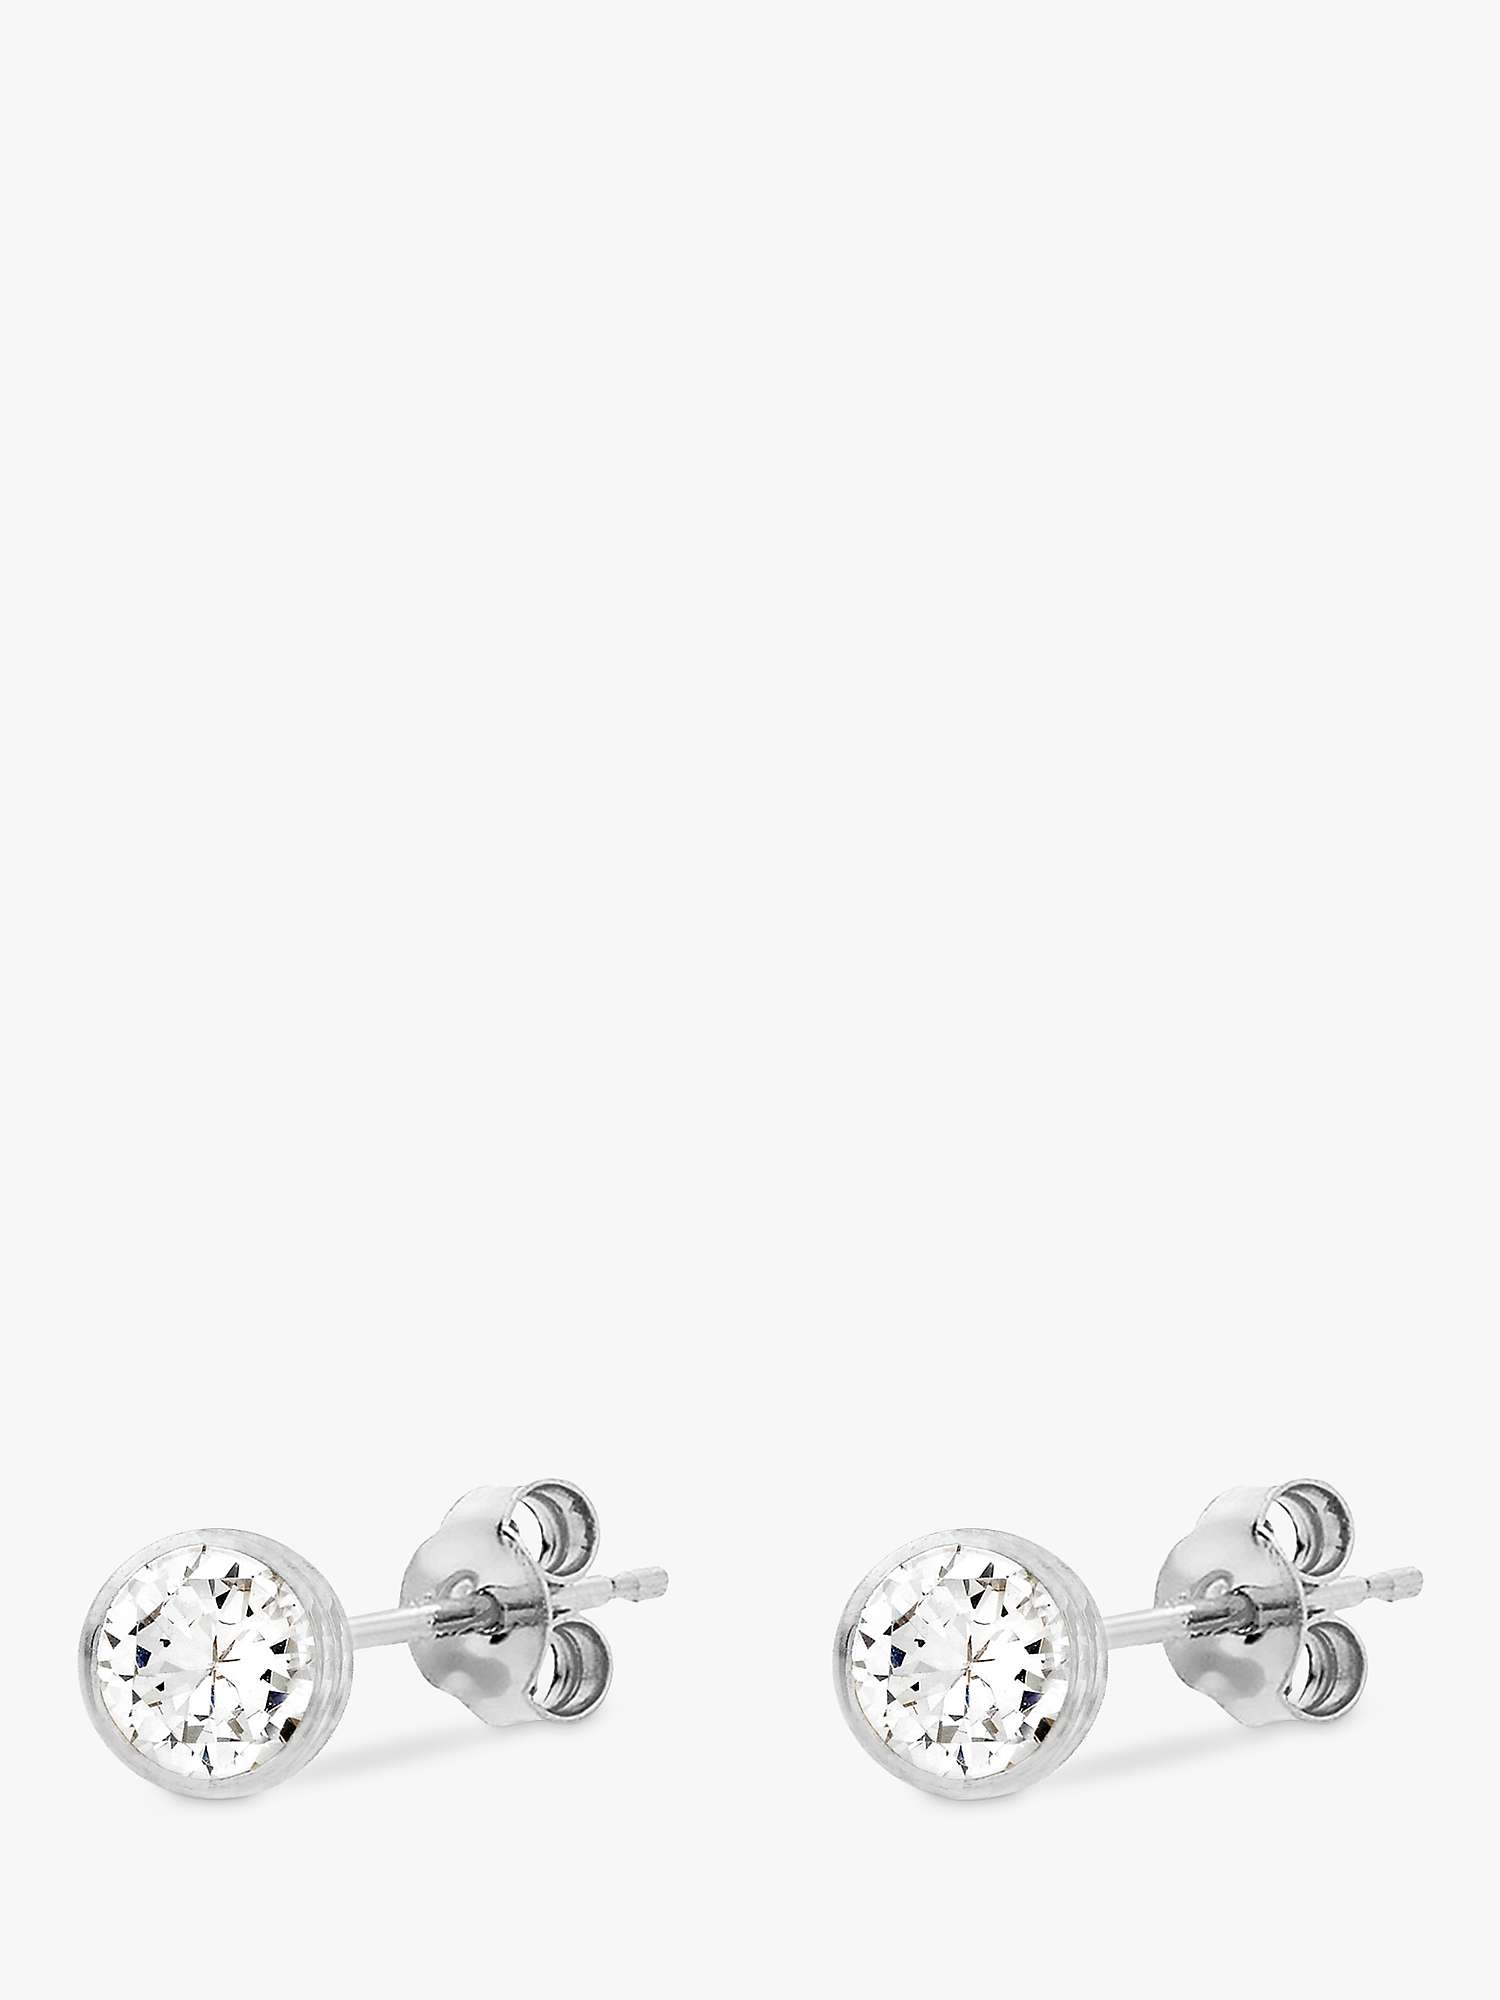 Buy IBB 9ct White Gold Round Cubic Zirconia Stud Earrings Online at johnlewis.com